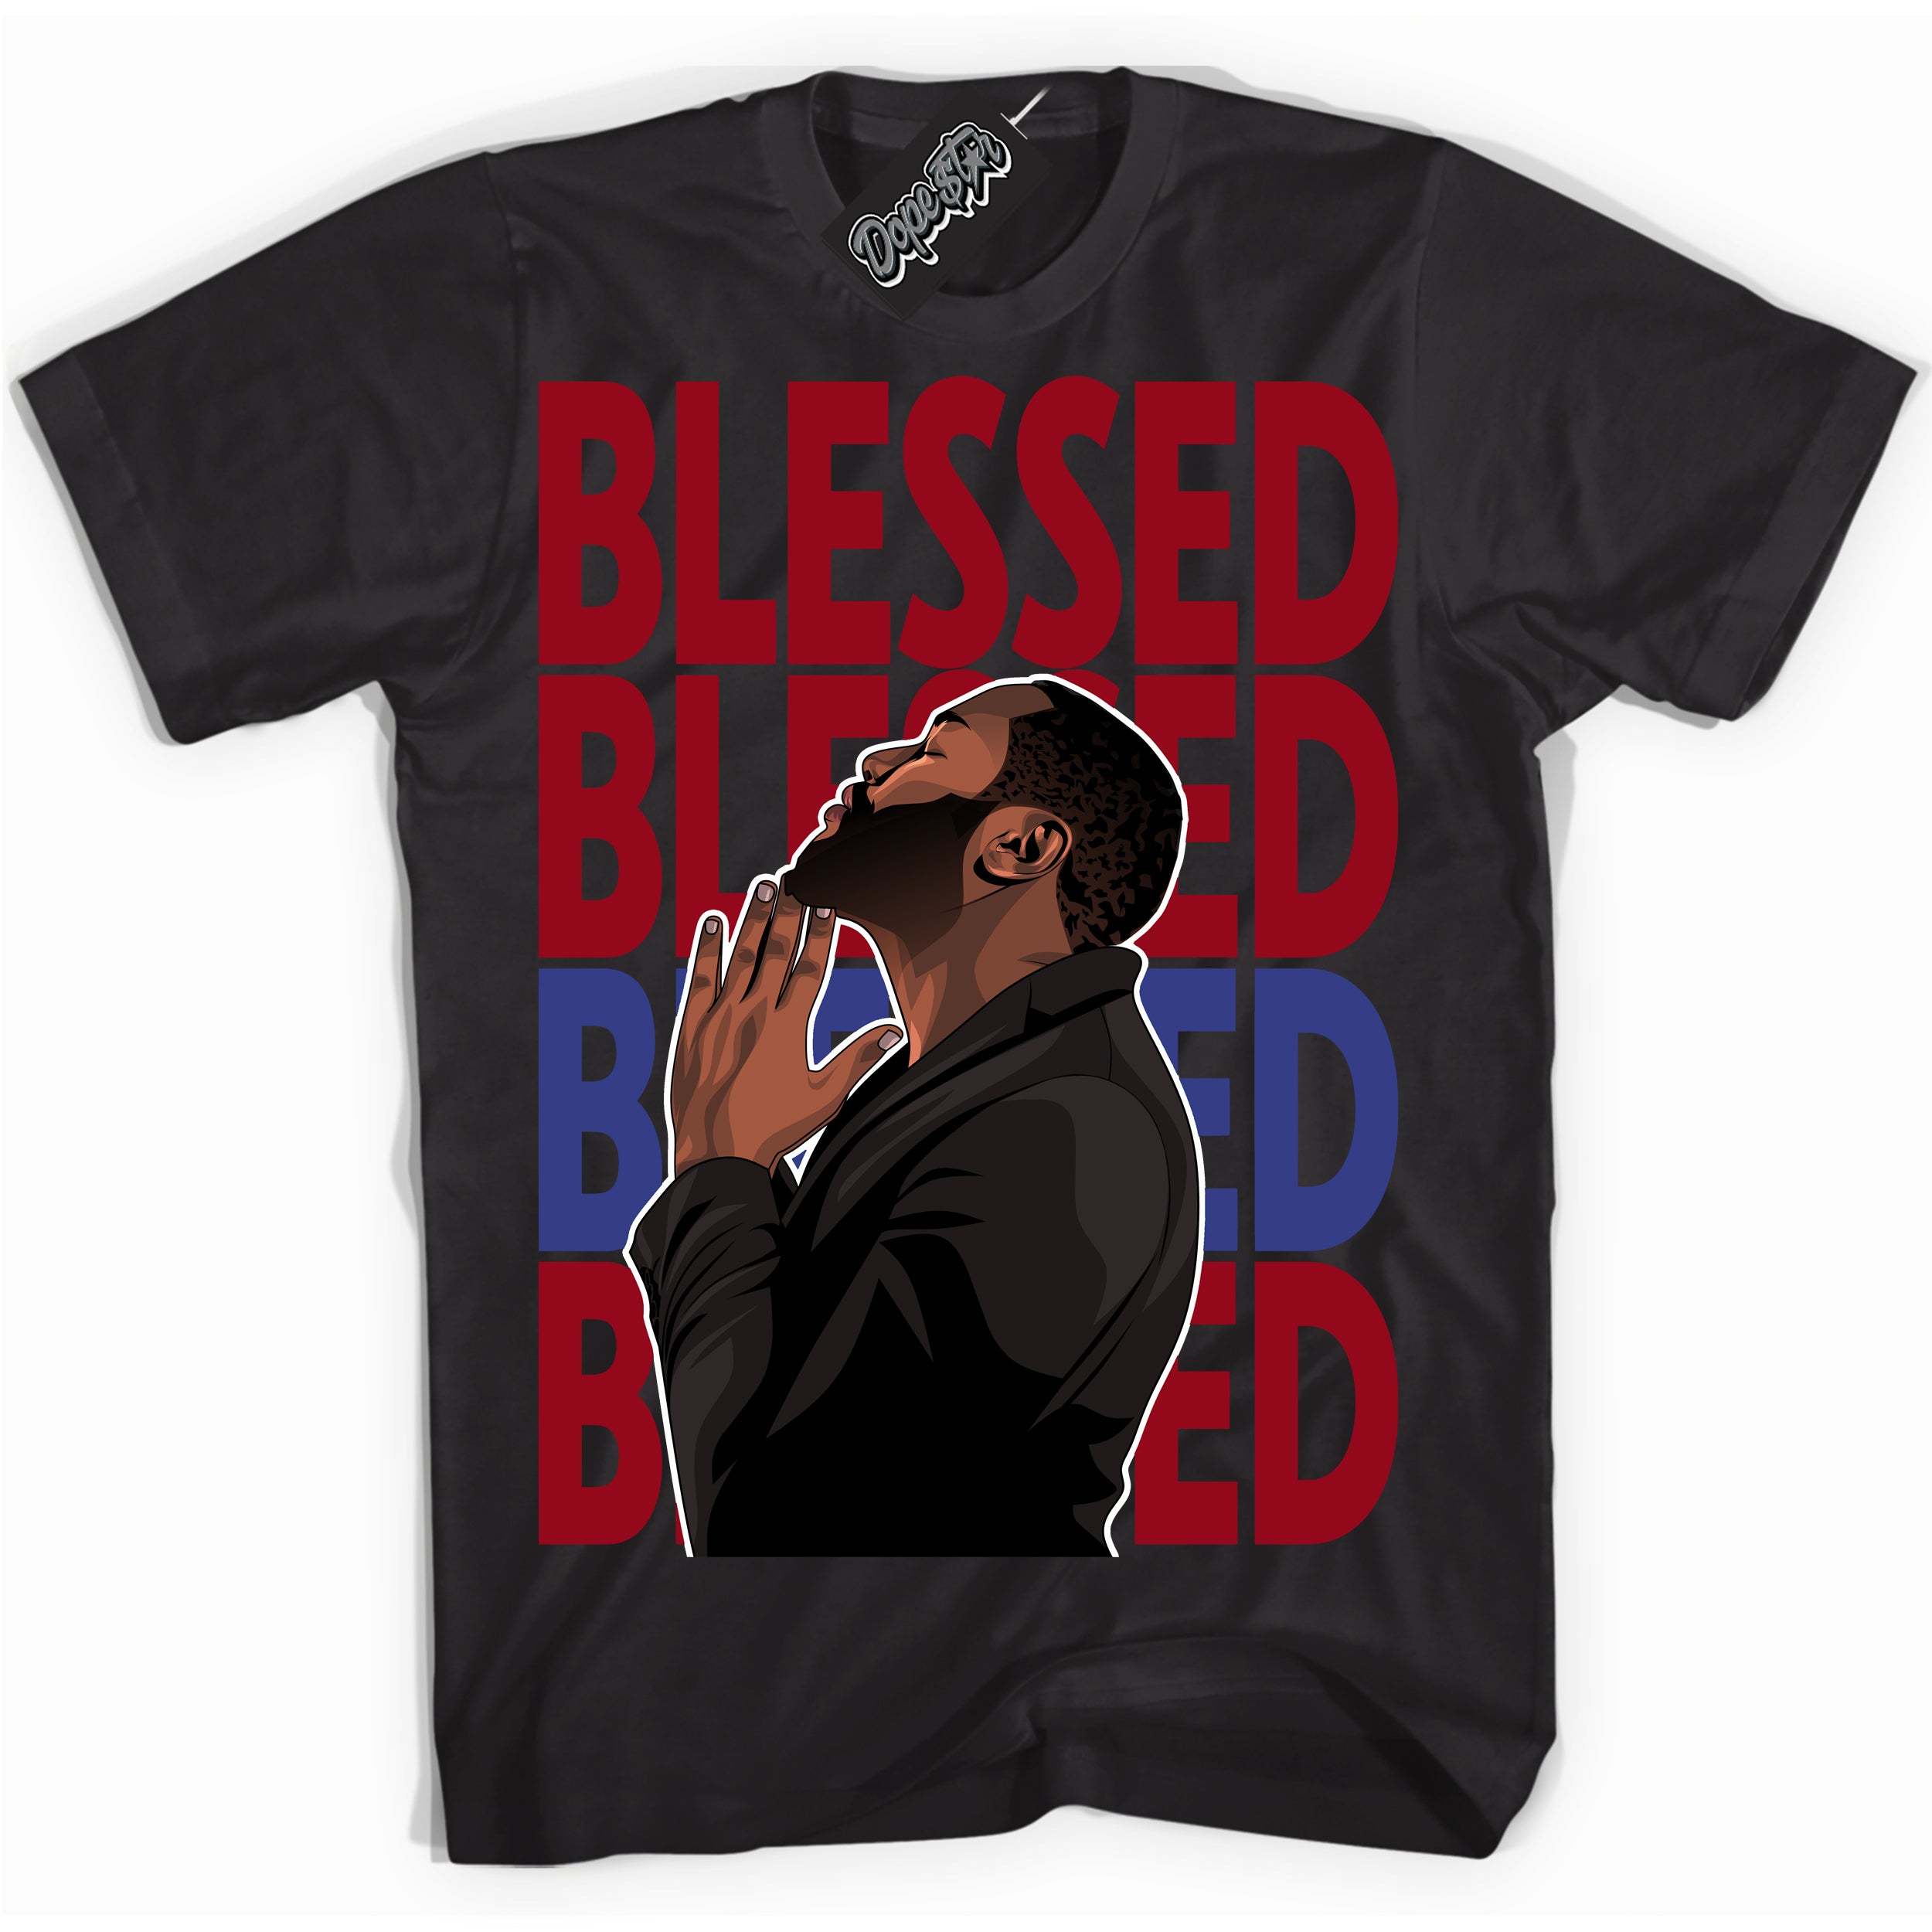 Cool Black Shirt with “ God Blessed ” design that perfectly matches Playoffs 8s Sneakers.